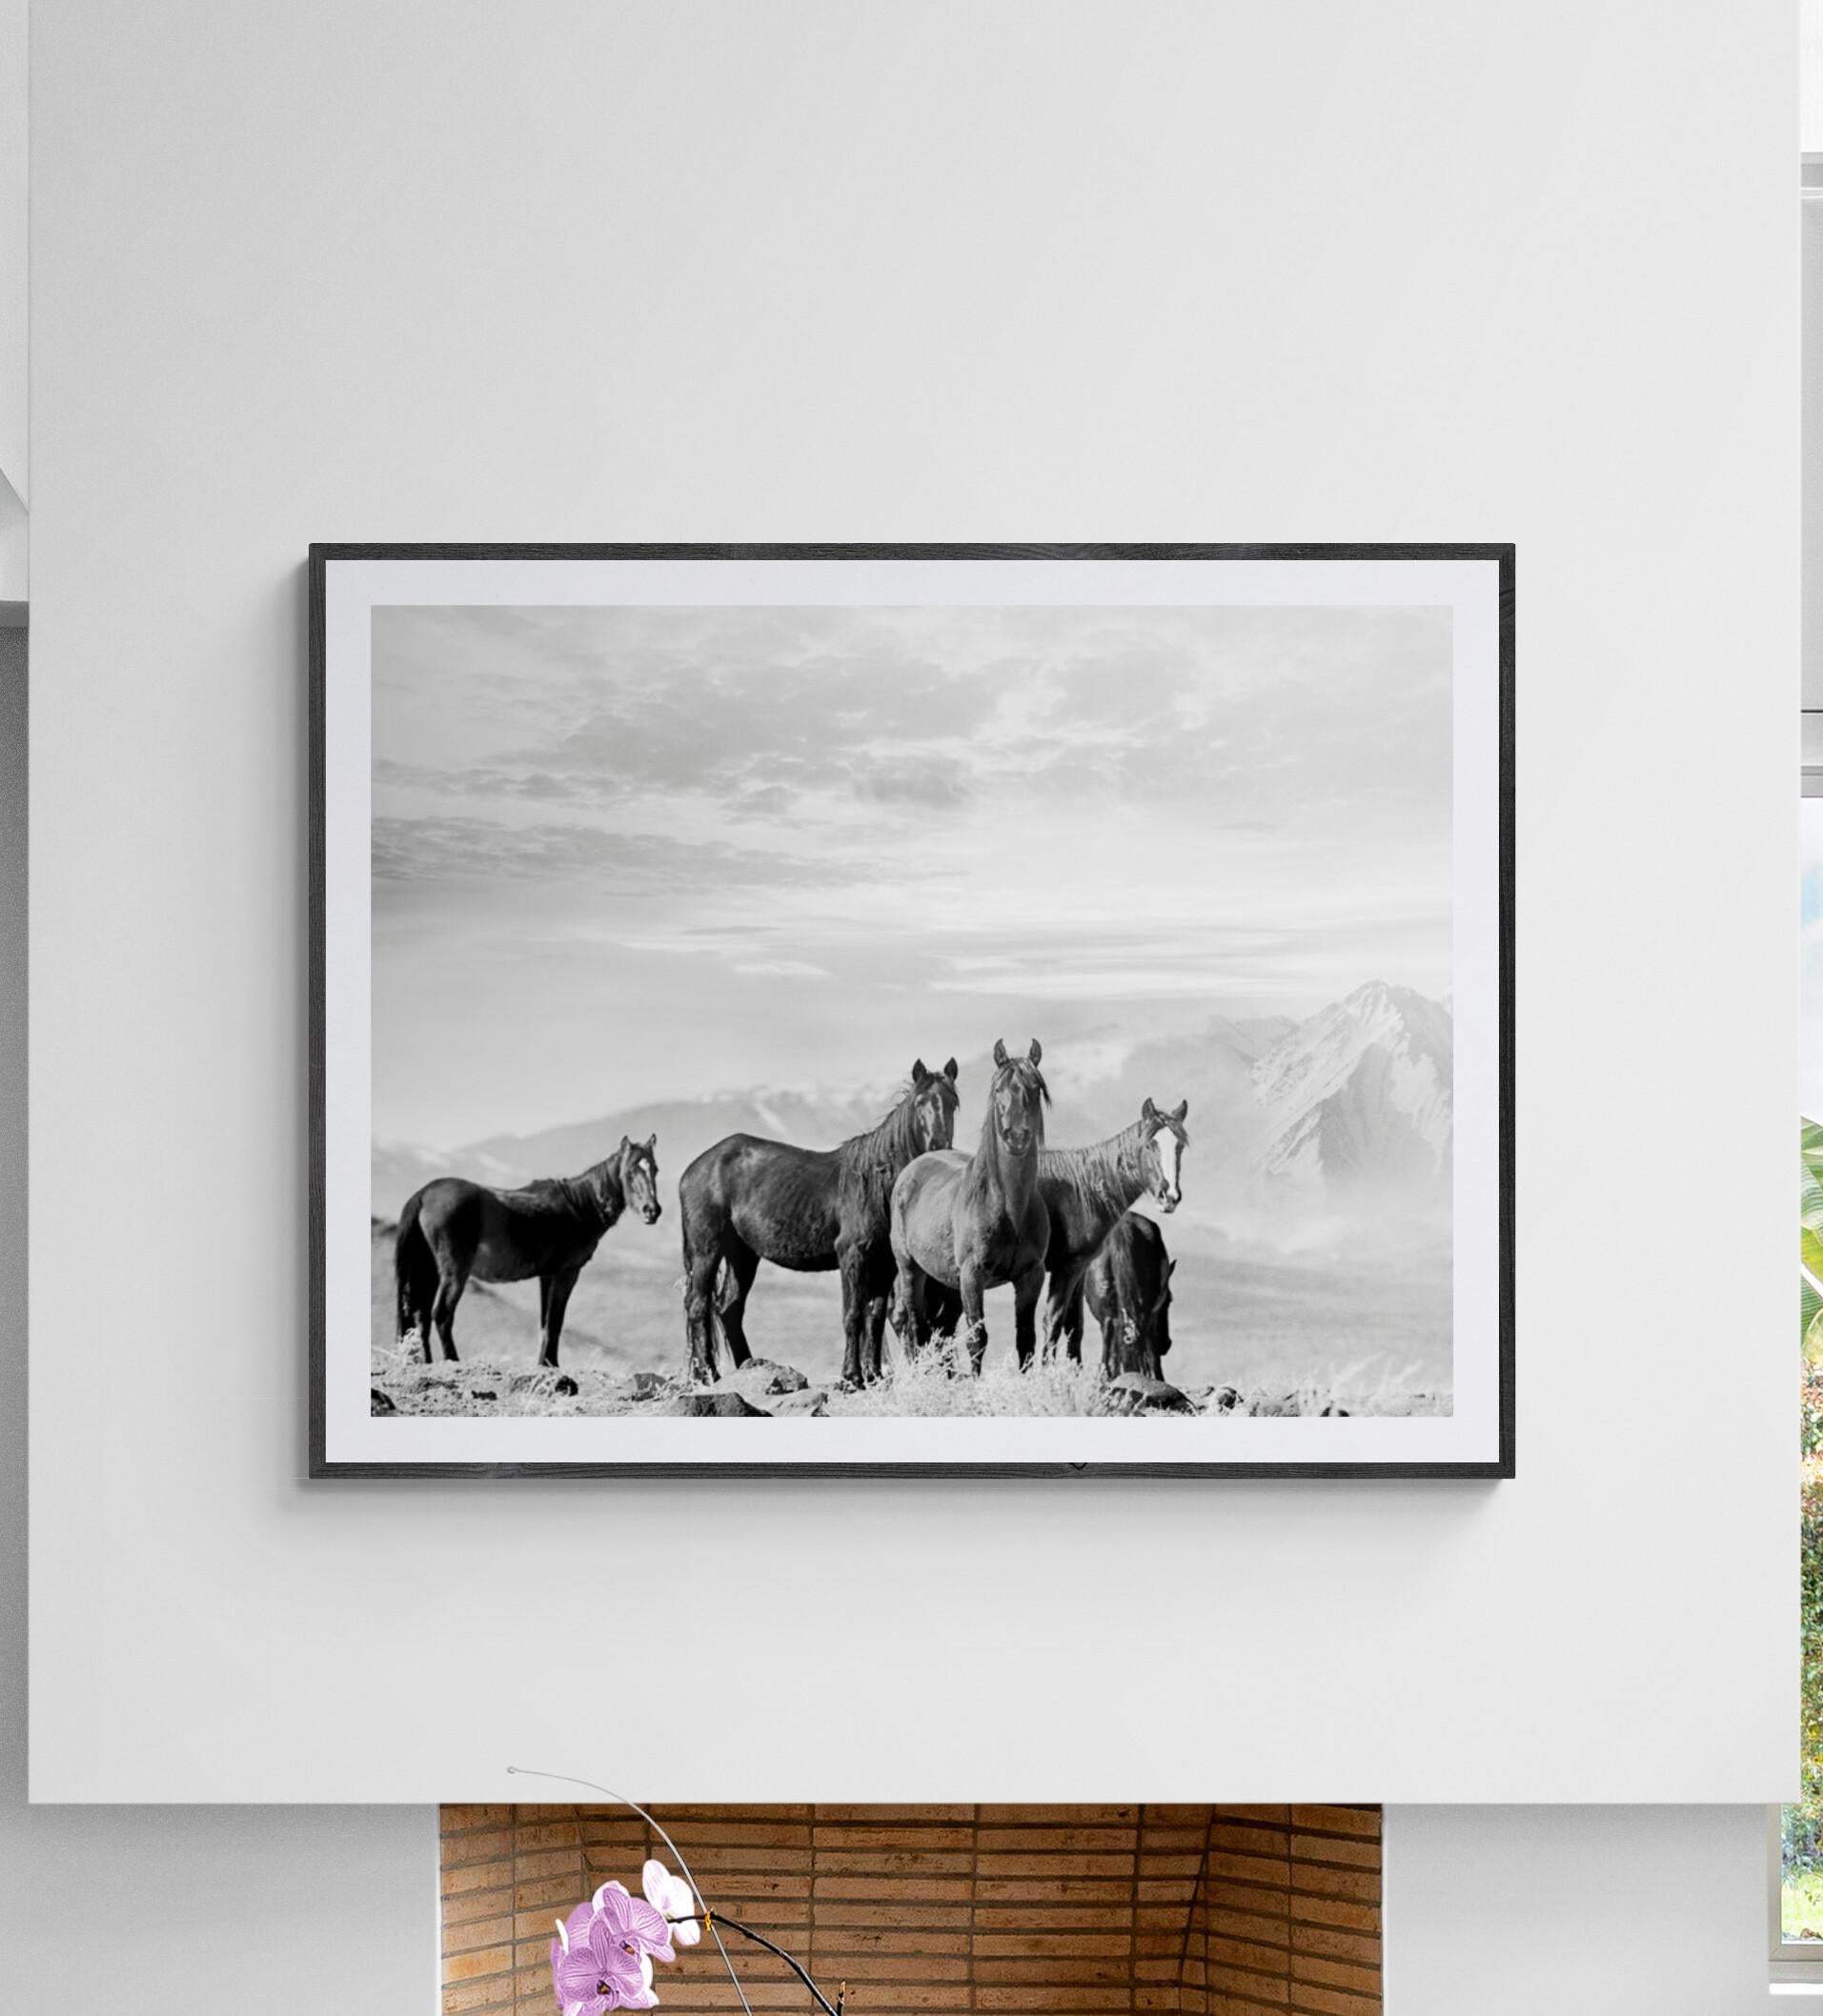 High Sierra Mustangs, Black and White Photography, Wild Horses Photograph 40x60 1